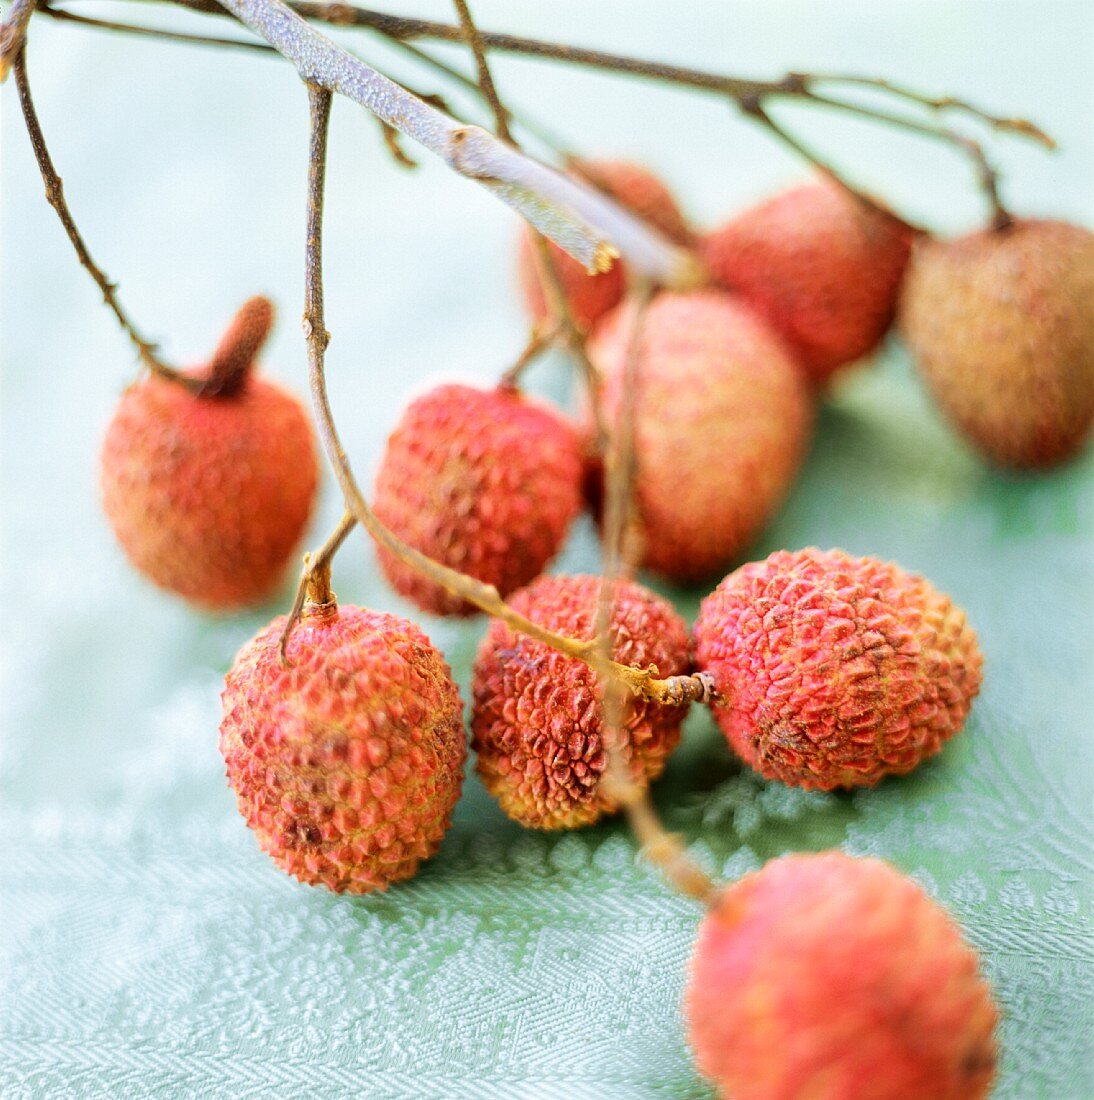 Several Lychee Fruit